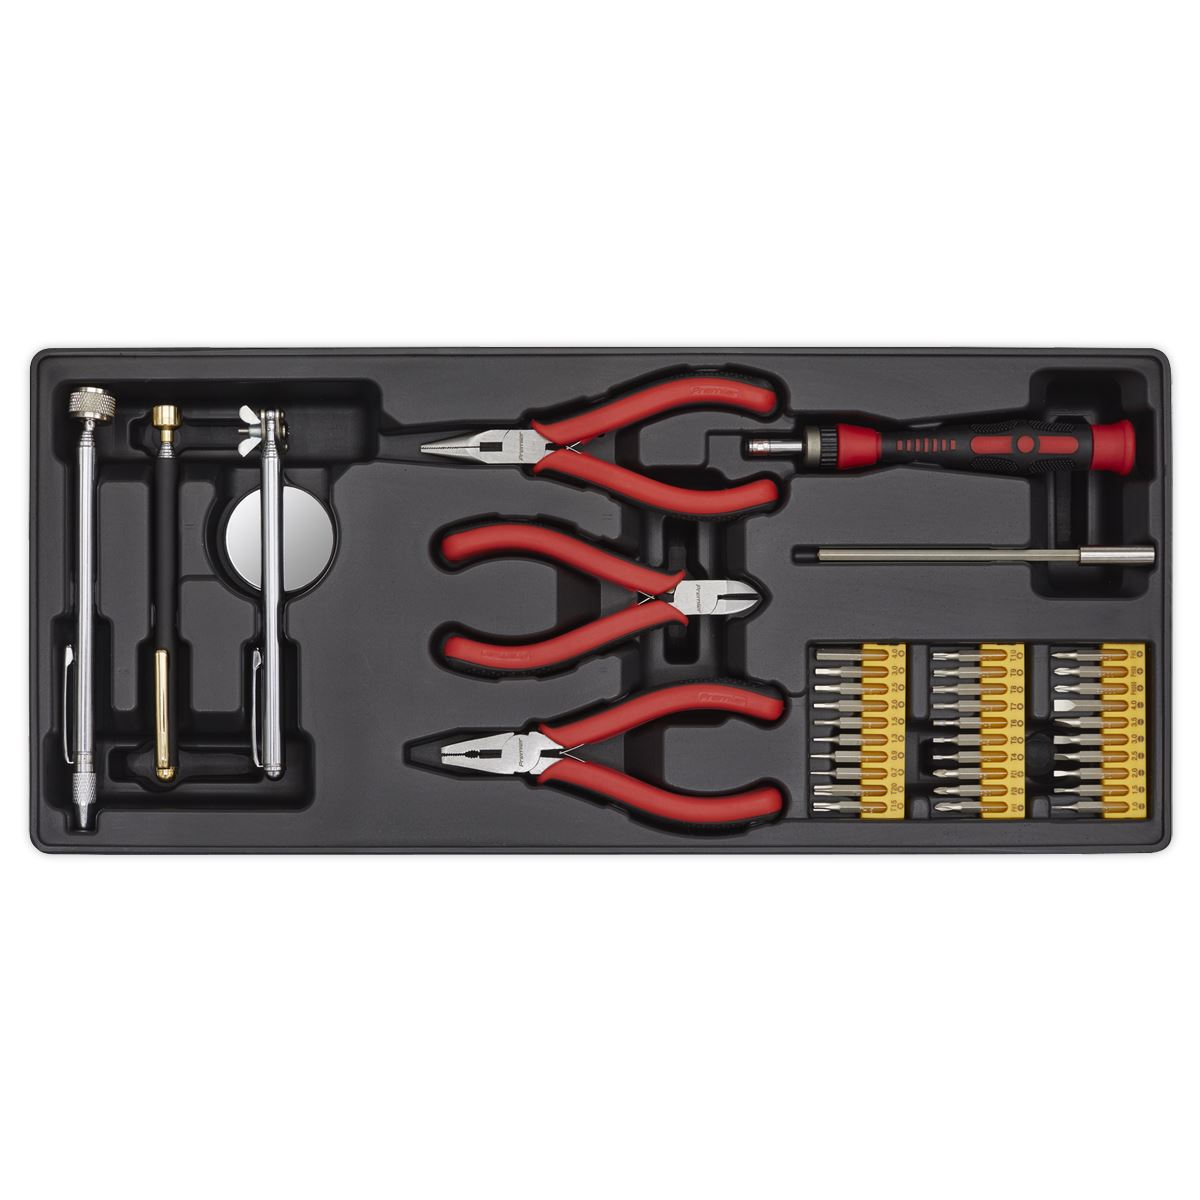 Sealey Premier Tool Tray with Precision & Pick-Up Tool Set 38pc